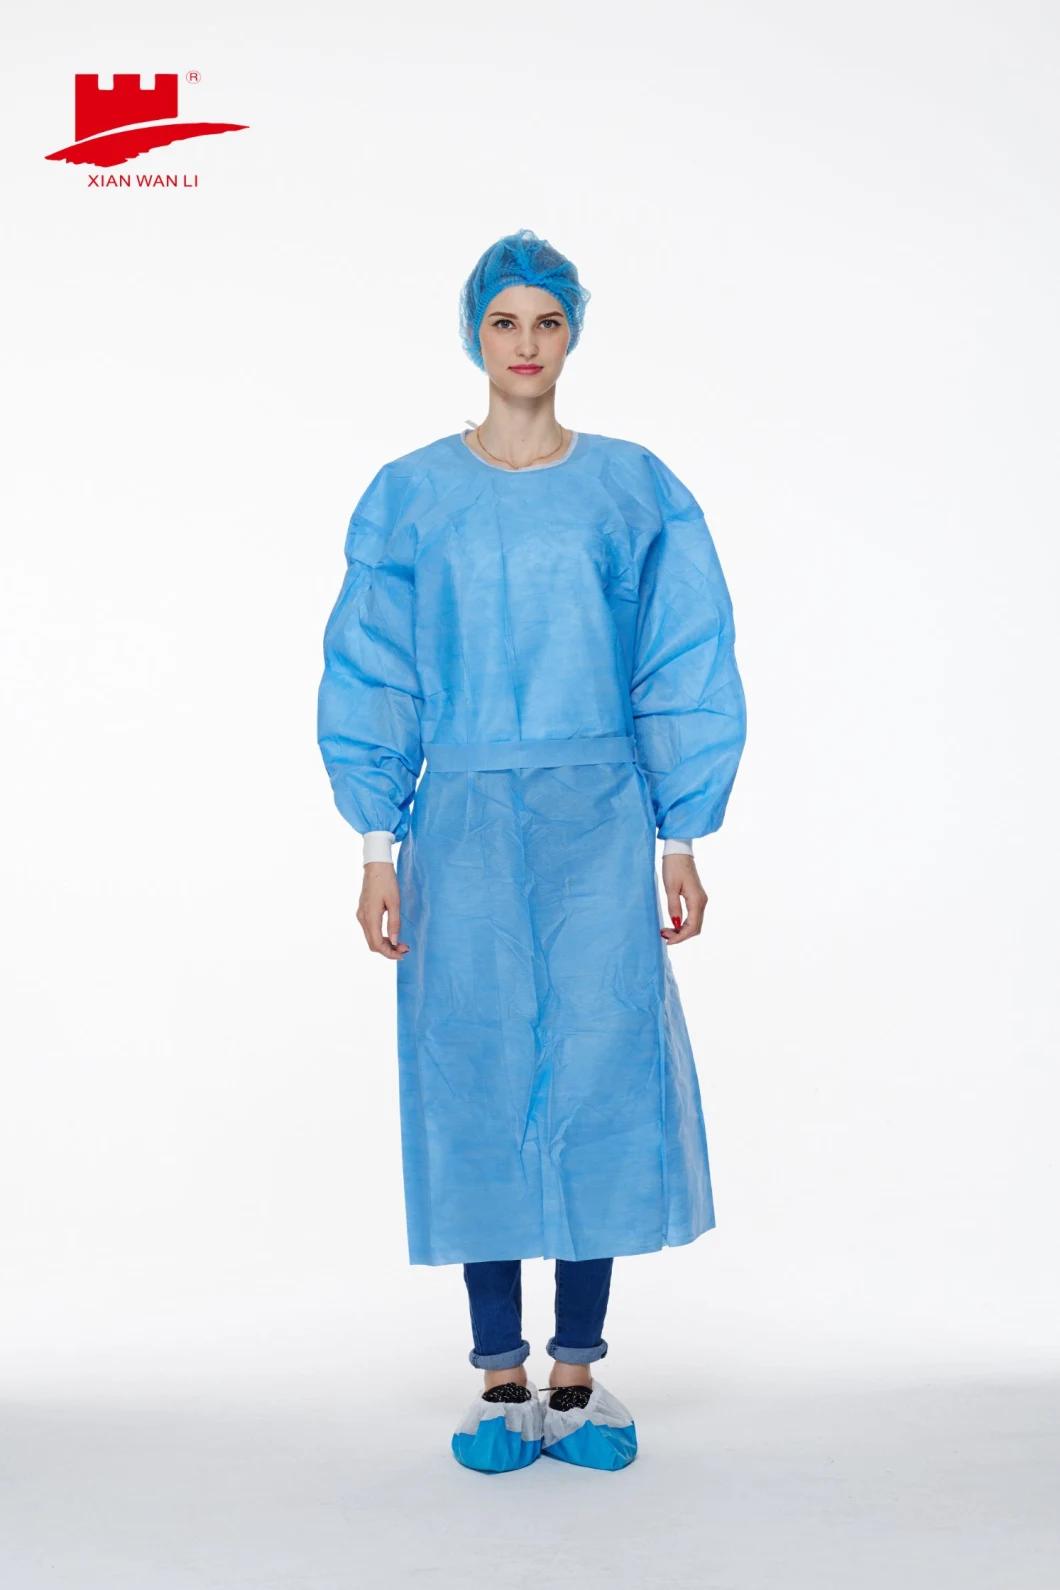 AAMI Level 1/2/3/4 Isolation Gown Surgical Medical Suit Water Resistant